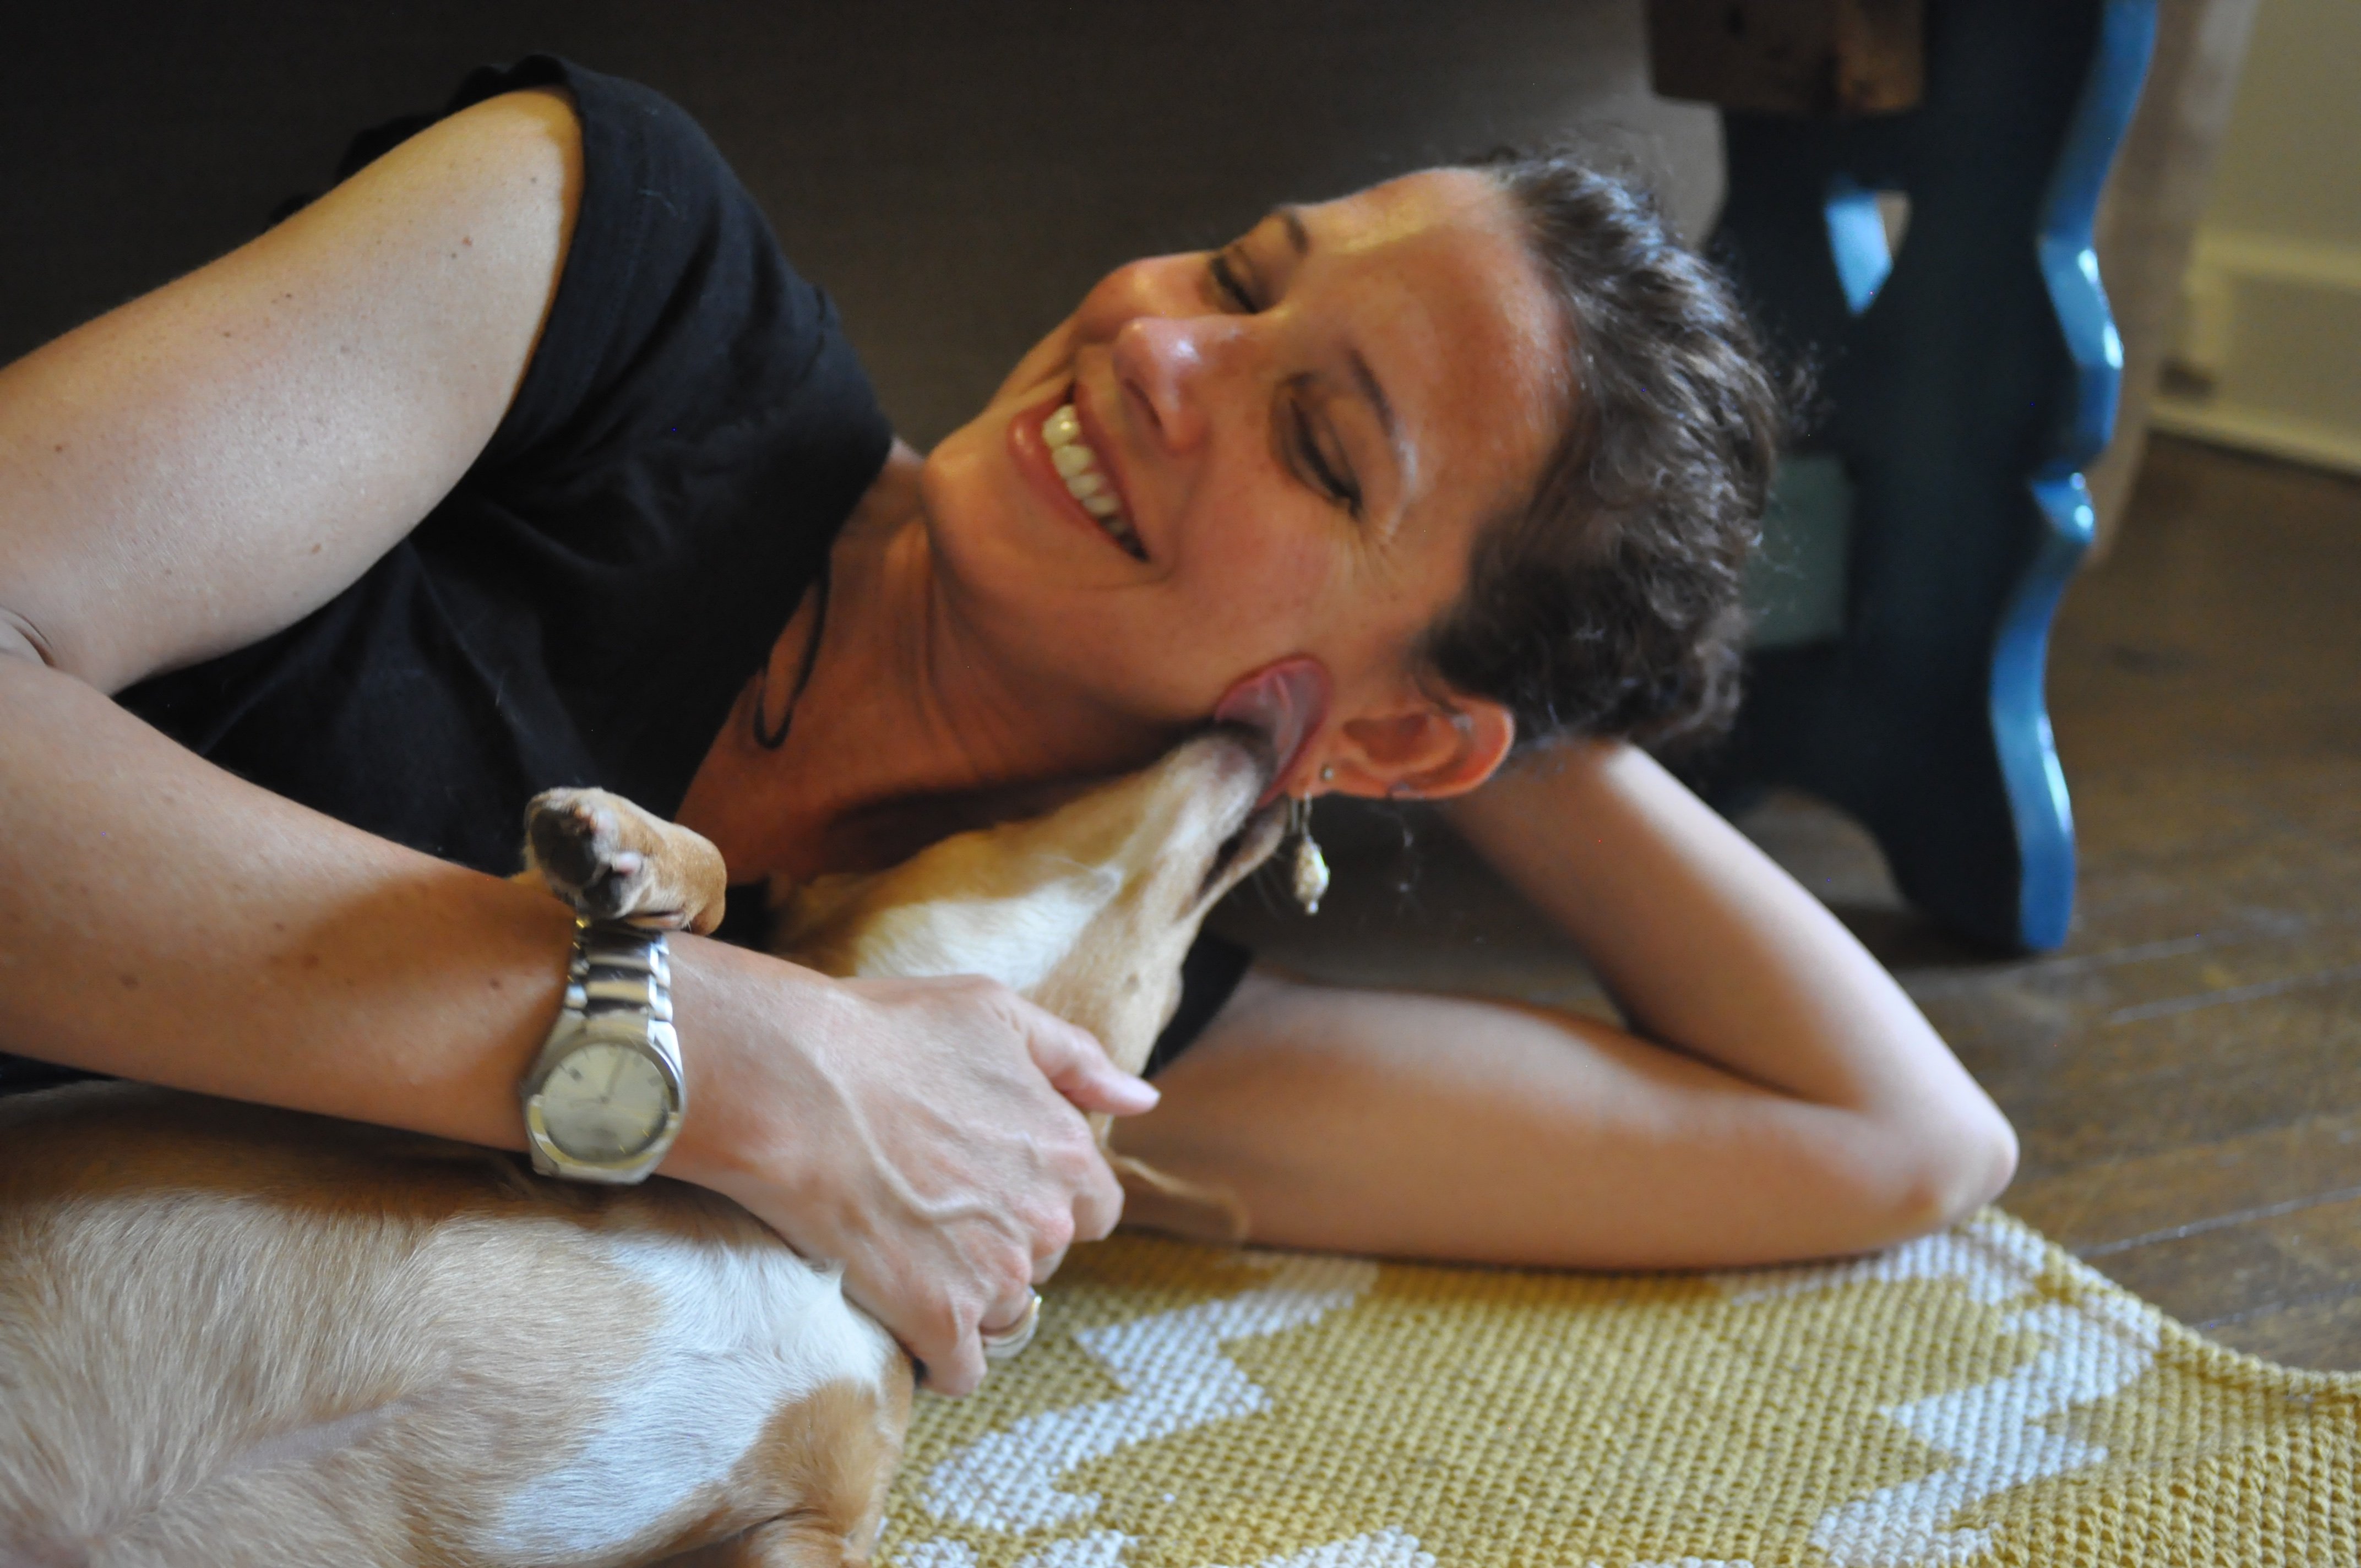 Elena, the adorable dog who was reacued by CAP, hangs out at her new home with PETA staffer Rachel Bellis.